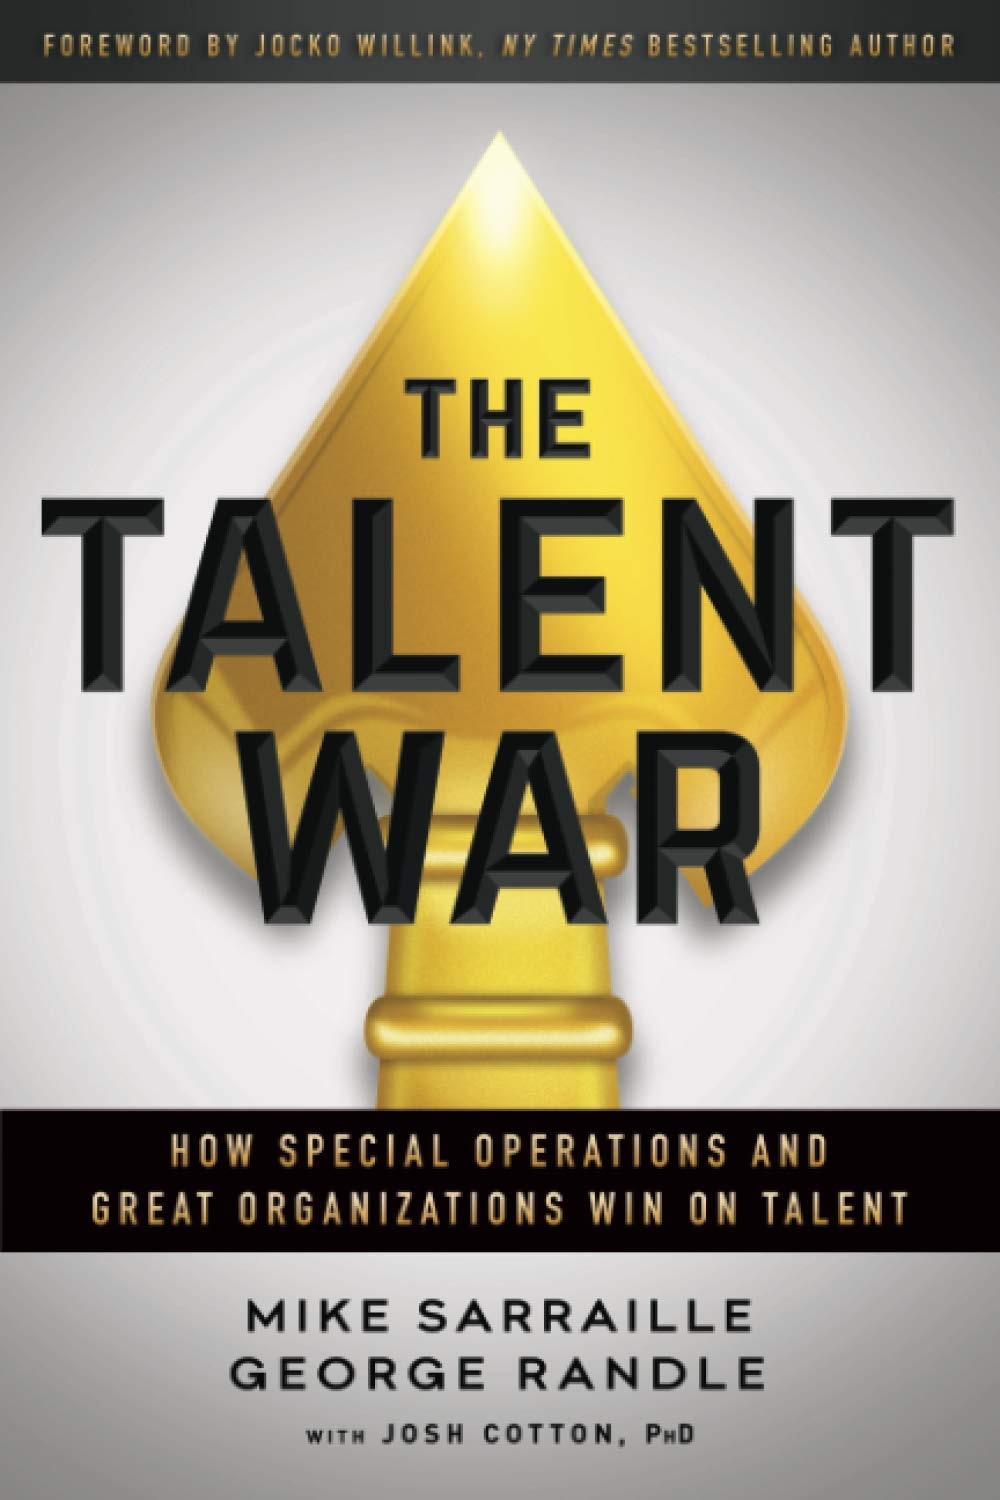 Mike Sarraille _ Gearge Randle - The Talent War. How Special Operations and Great Organizations Win on Talent